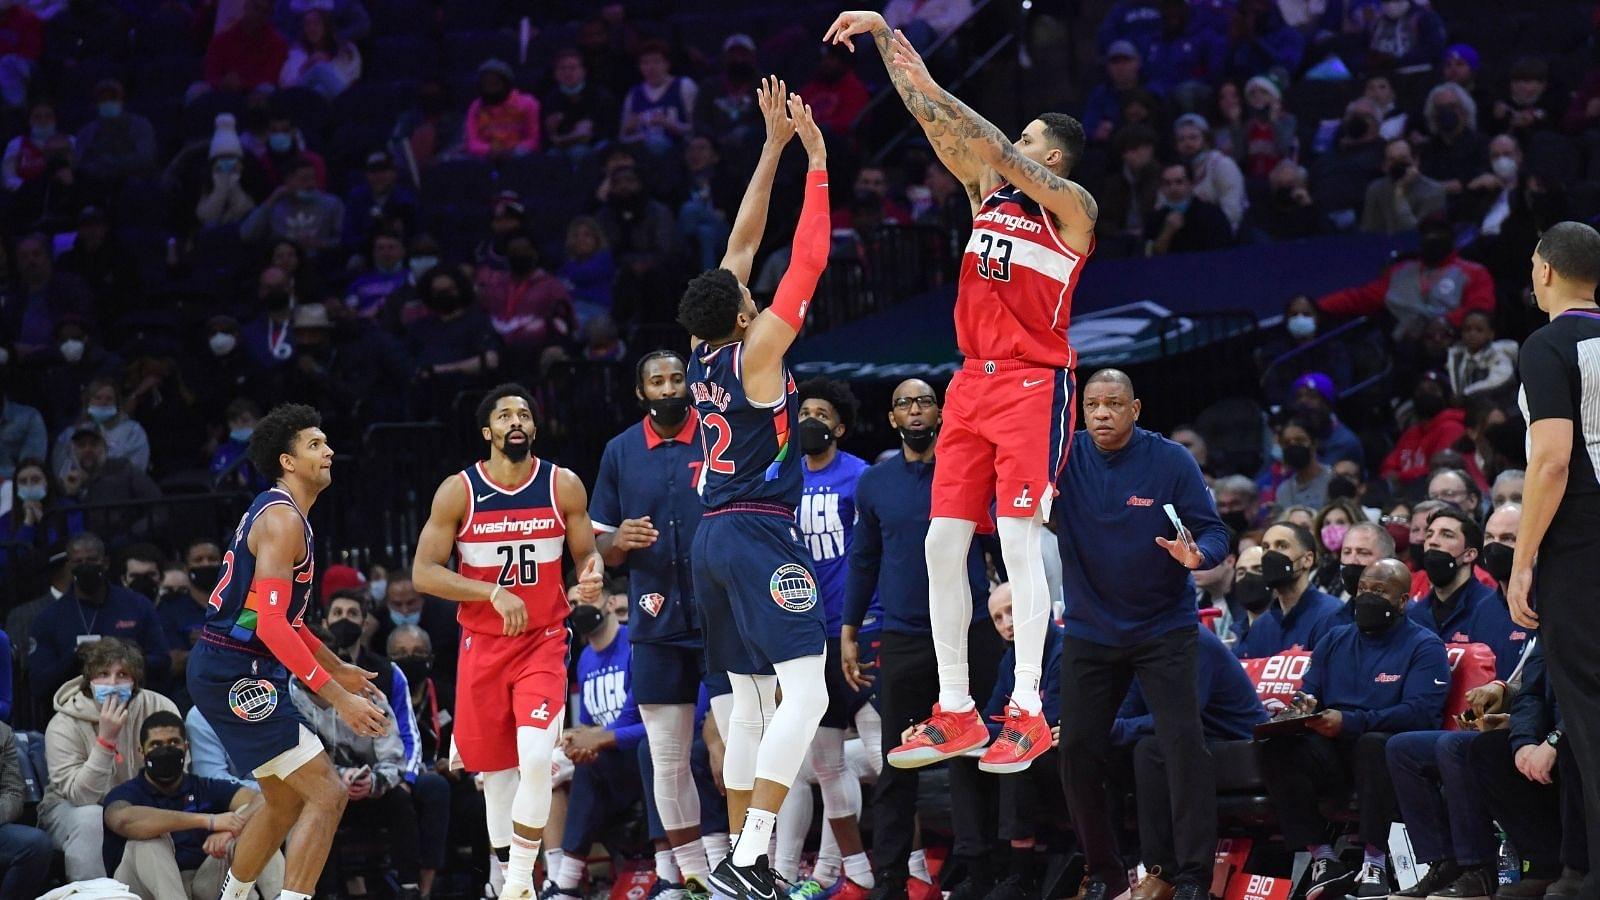 "Kyle Kuzma is playing like he is Kevin Durant": Wizards forward amazes NBA Twitter along with a Sixers beat writer, putting up a clinic against Joel Embiid and Co in a 106-103 win